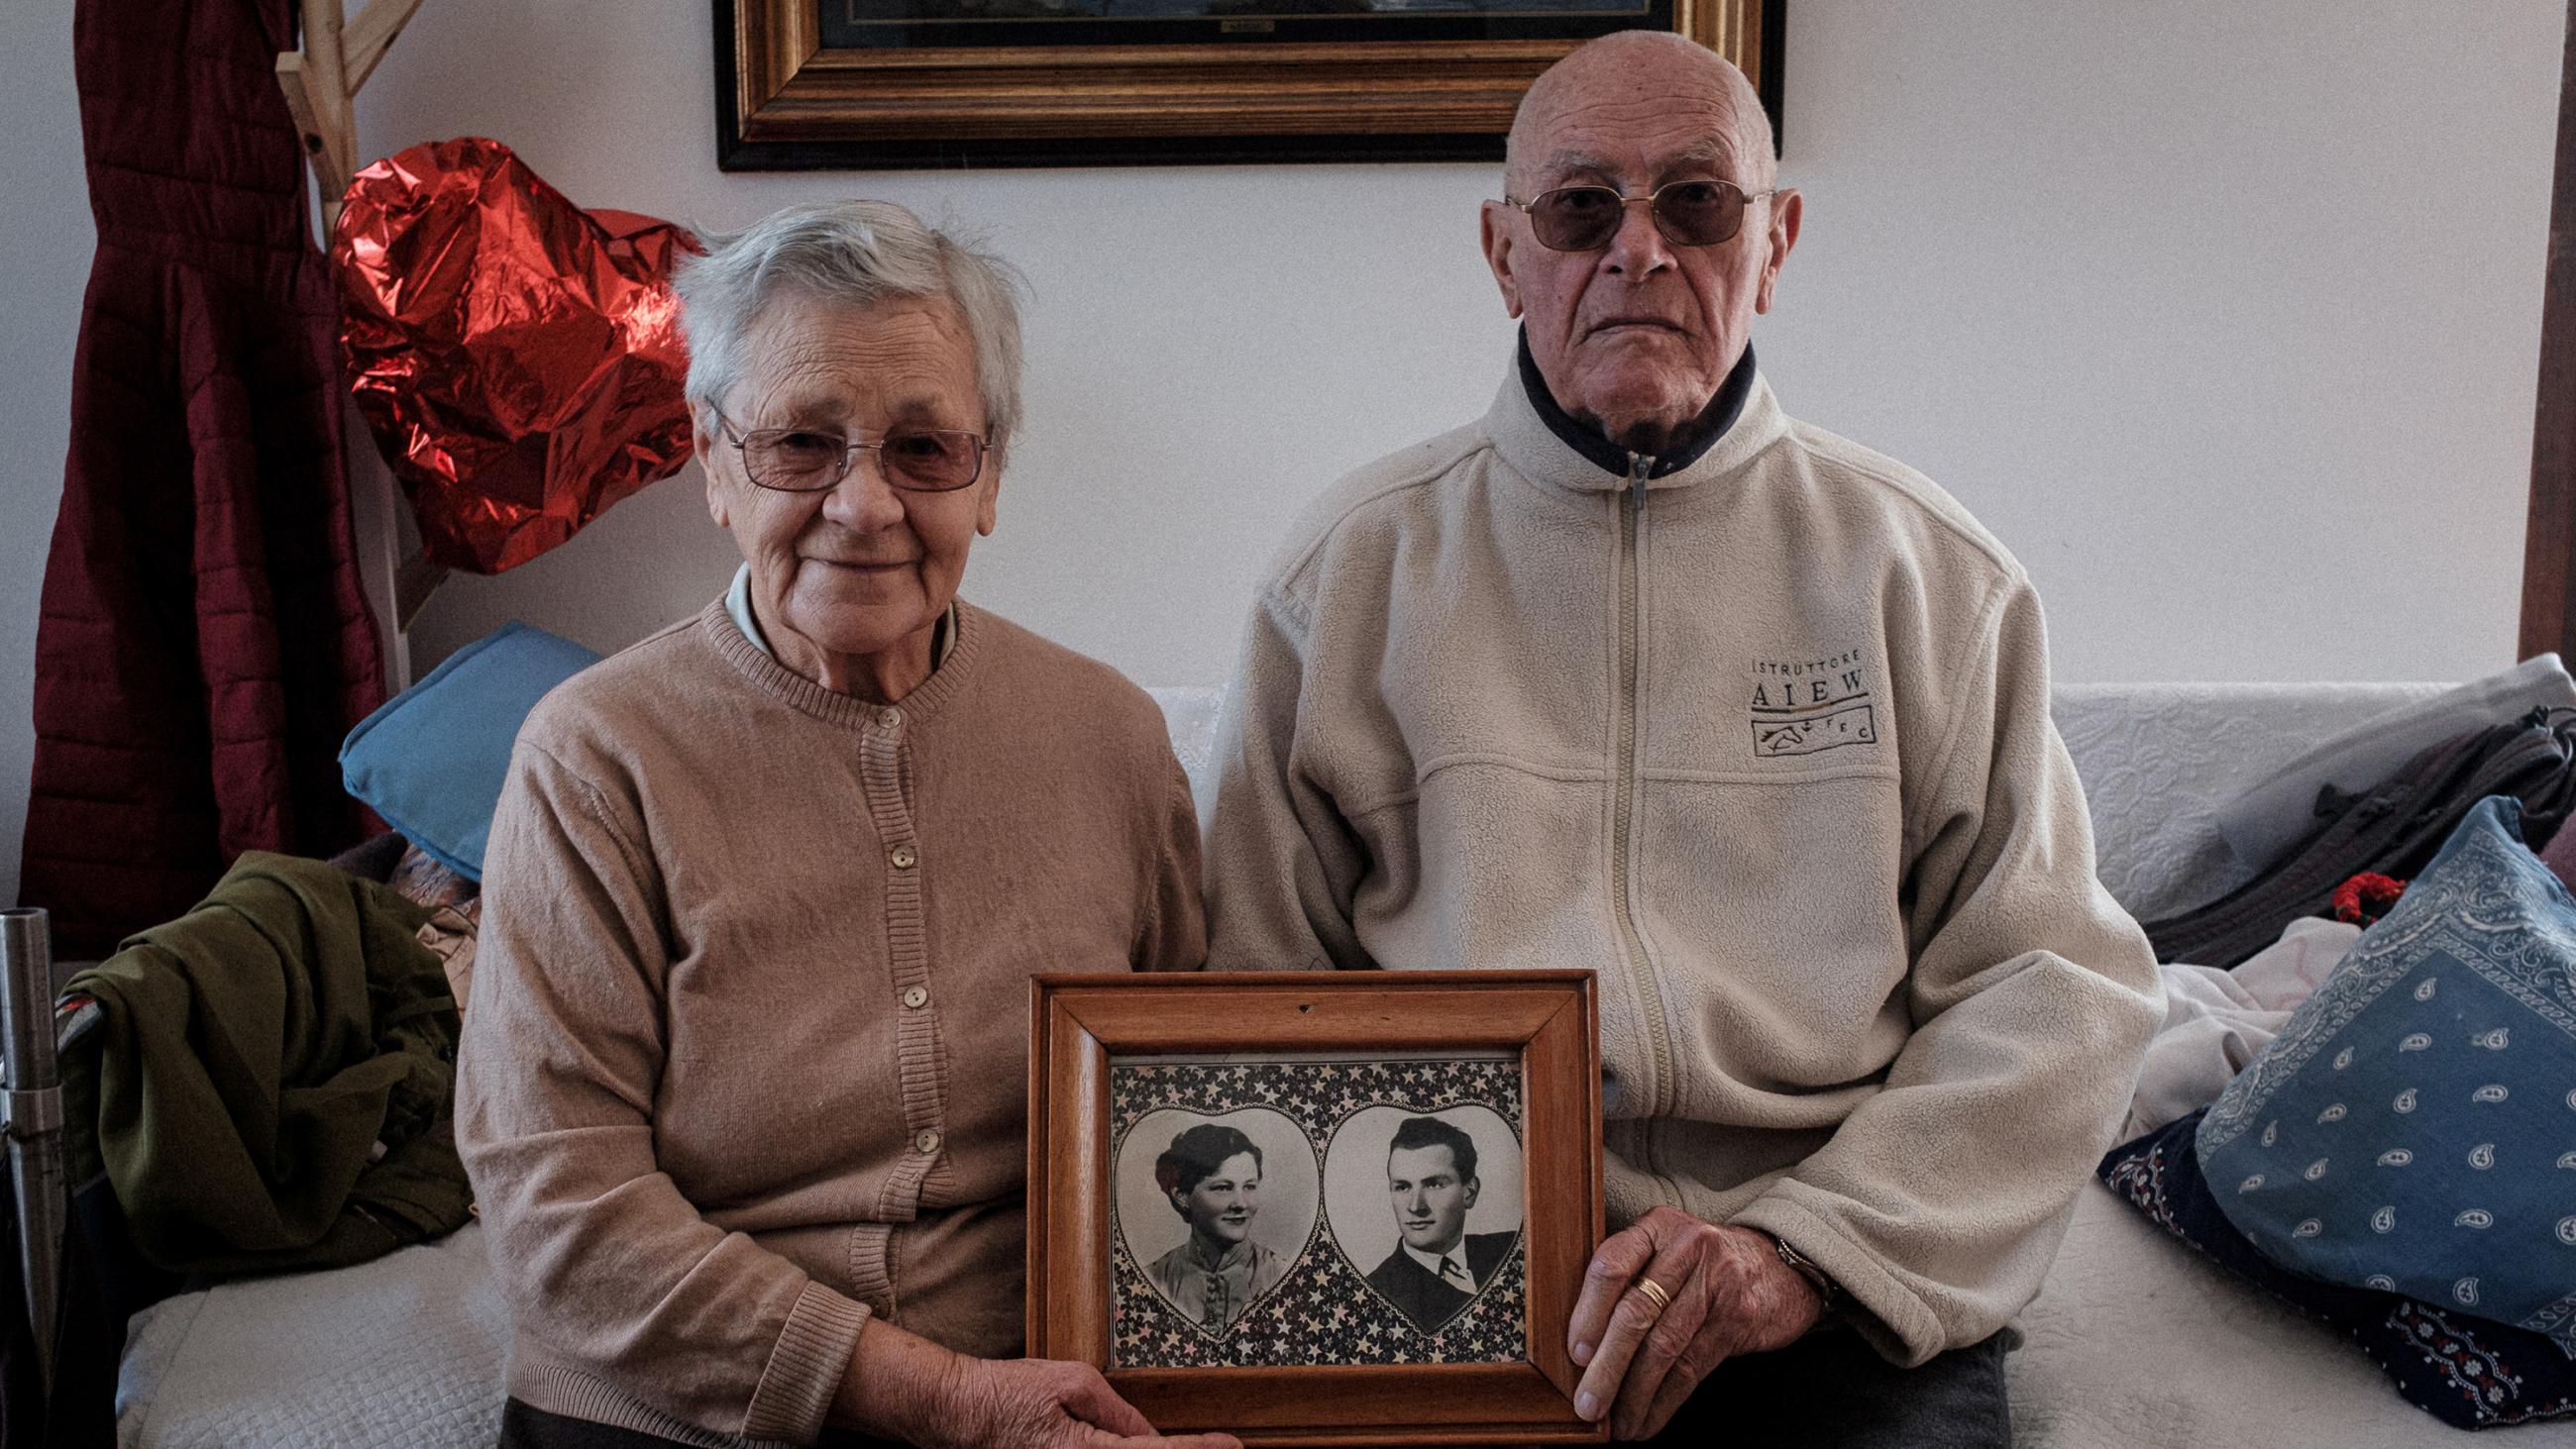 Picture shows the elderly couple sitting together holding a picture of the two of them taken many years before. They are a cute couple. 